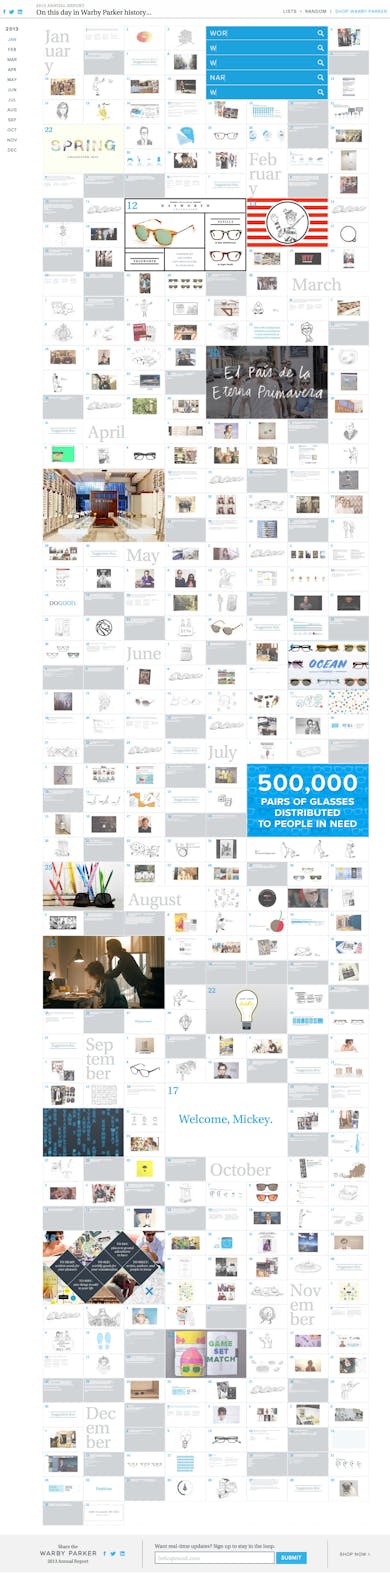 Warby Parker 2013 Annual Report Thumbnail Preview